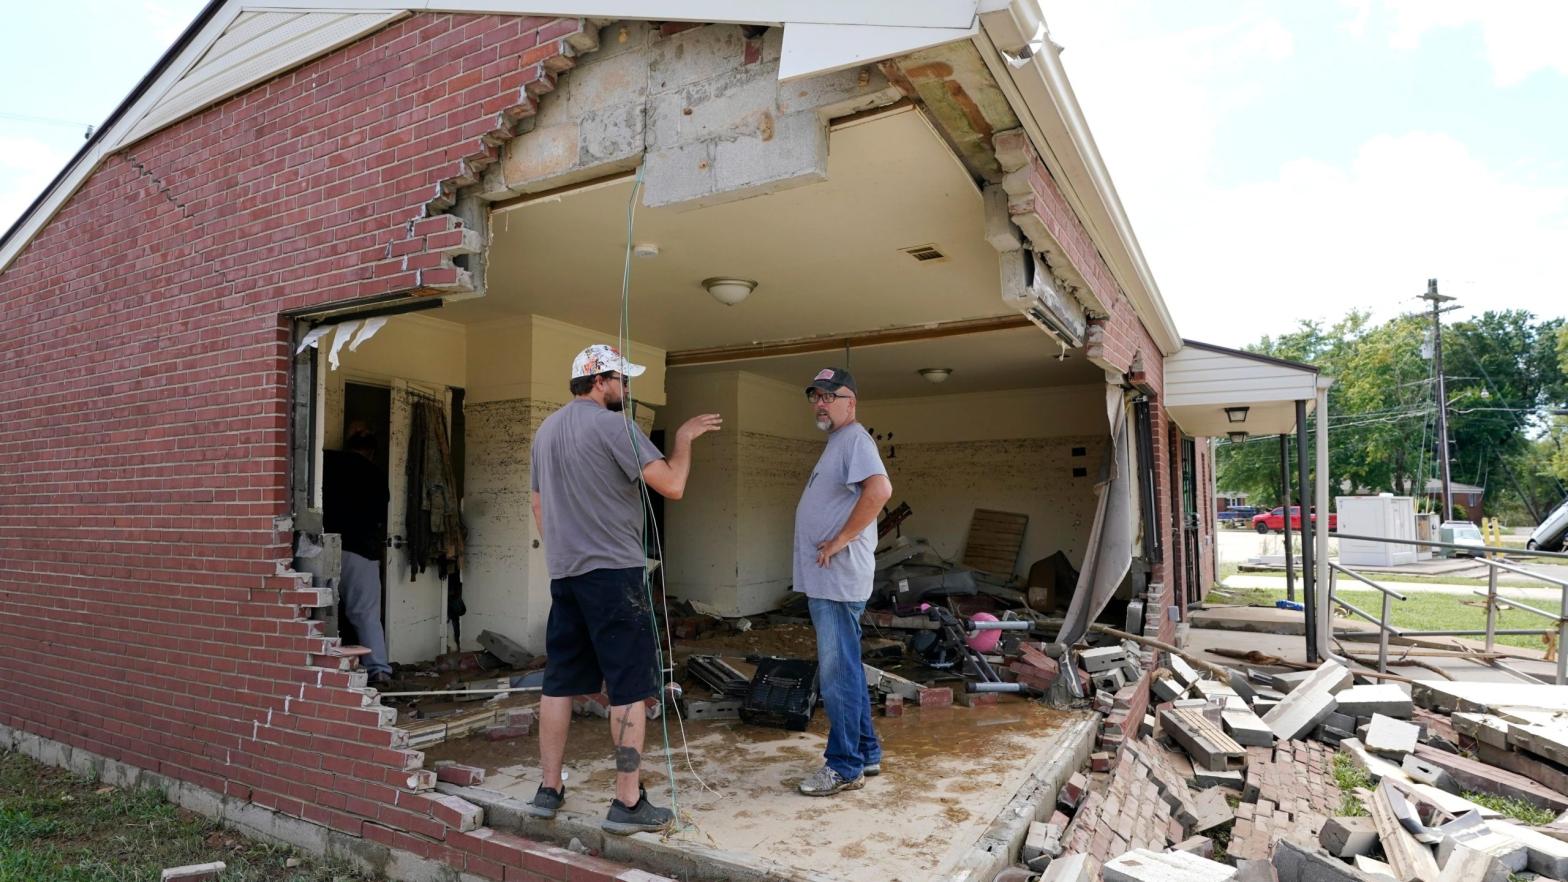 Brian Mitchell, right, looks through the damaged home of his mother-in-law along with family friend Chris Hoover, left, Sunday, Aug. 22, 2021, in Waverly, Tenn.  (Photo: Mark Humphrey, AP)